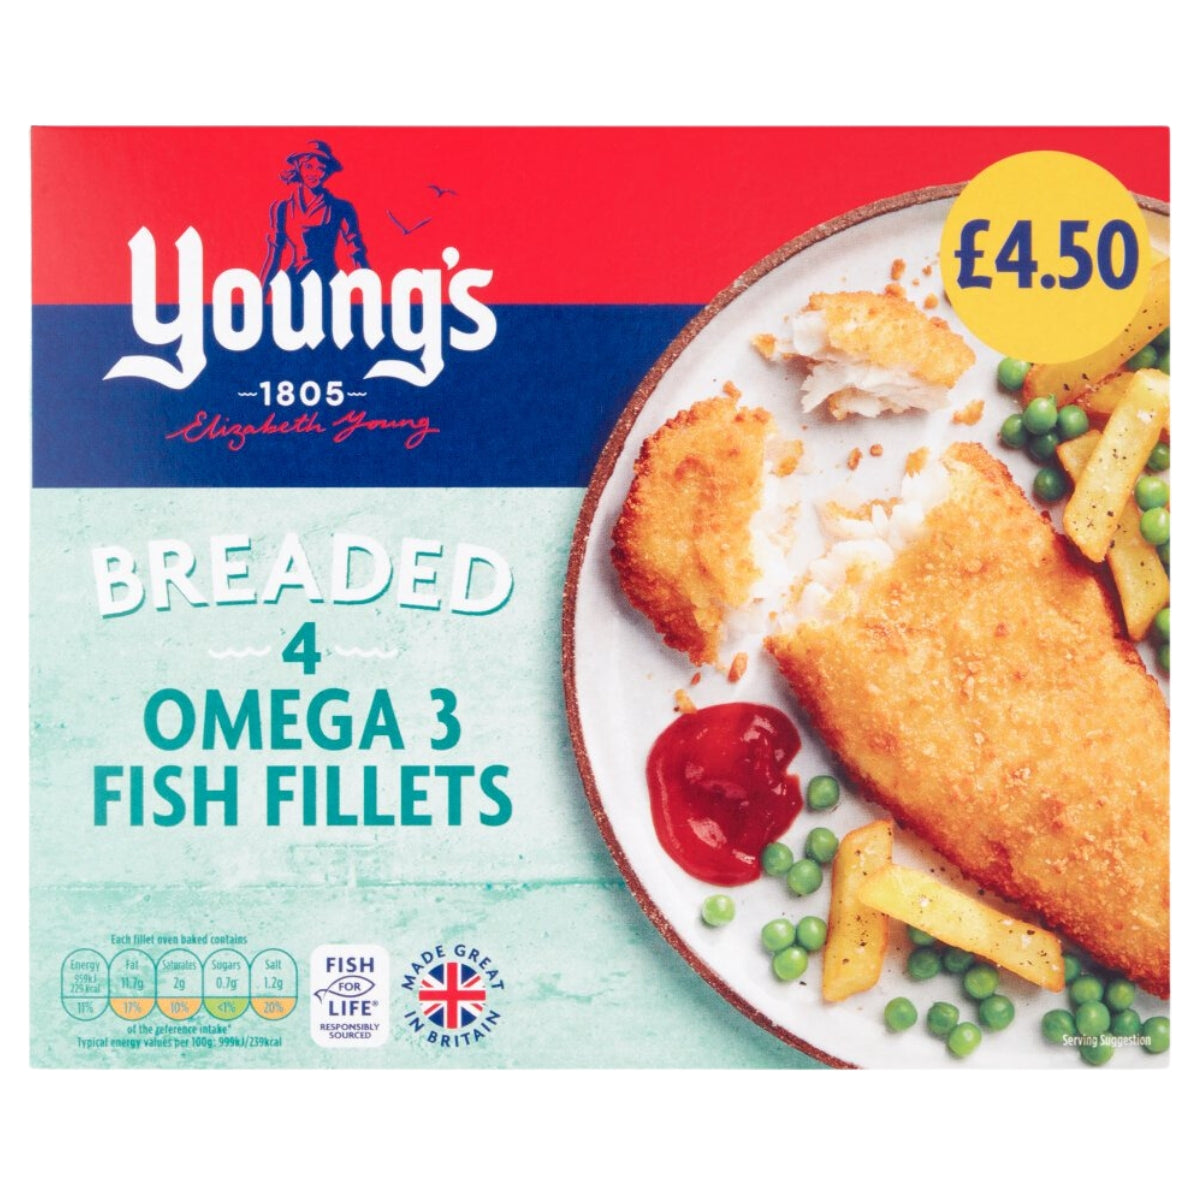 Young's - Breaded 4 Omega 3 Fish Fillets - 400g.